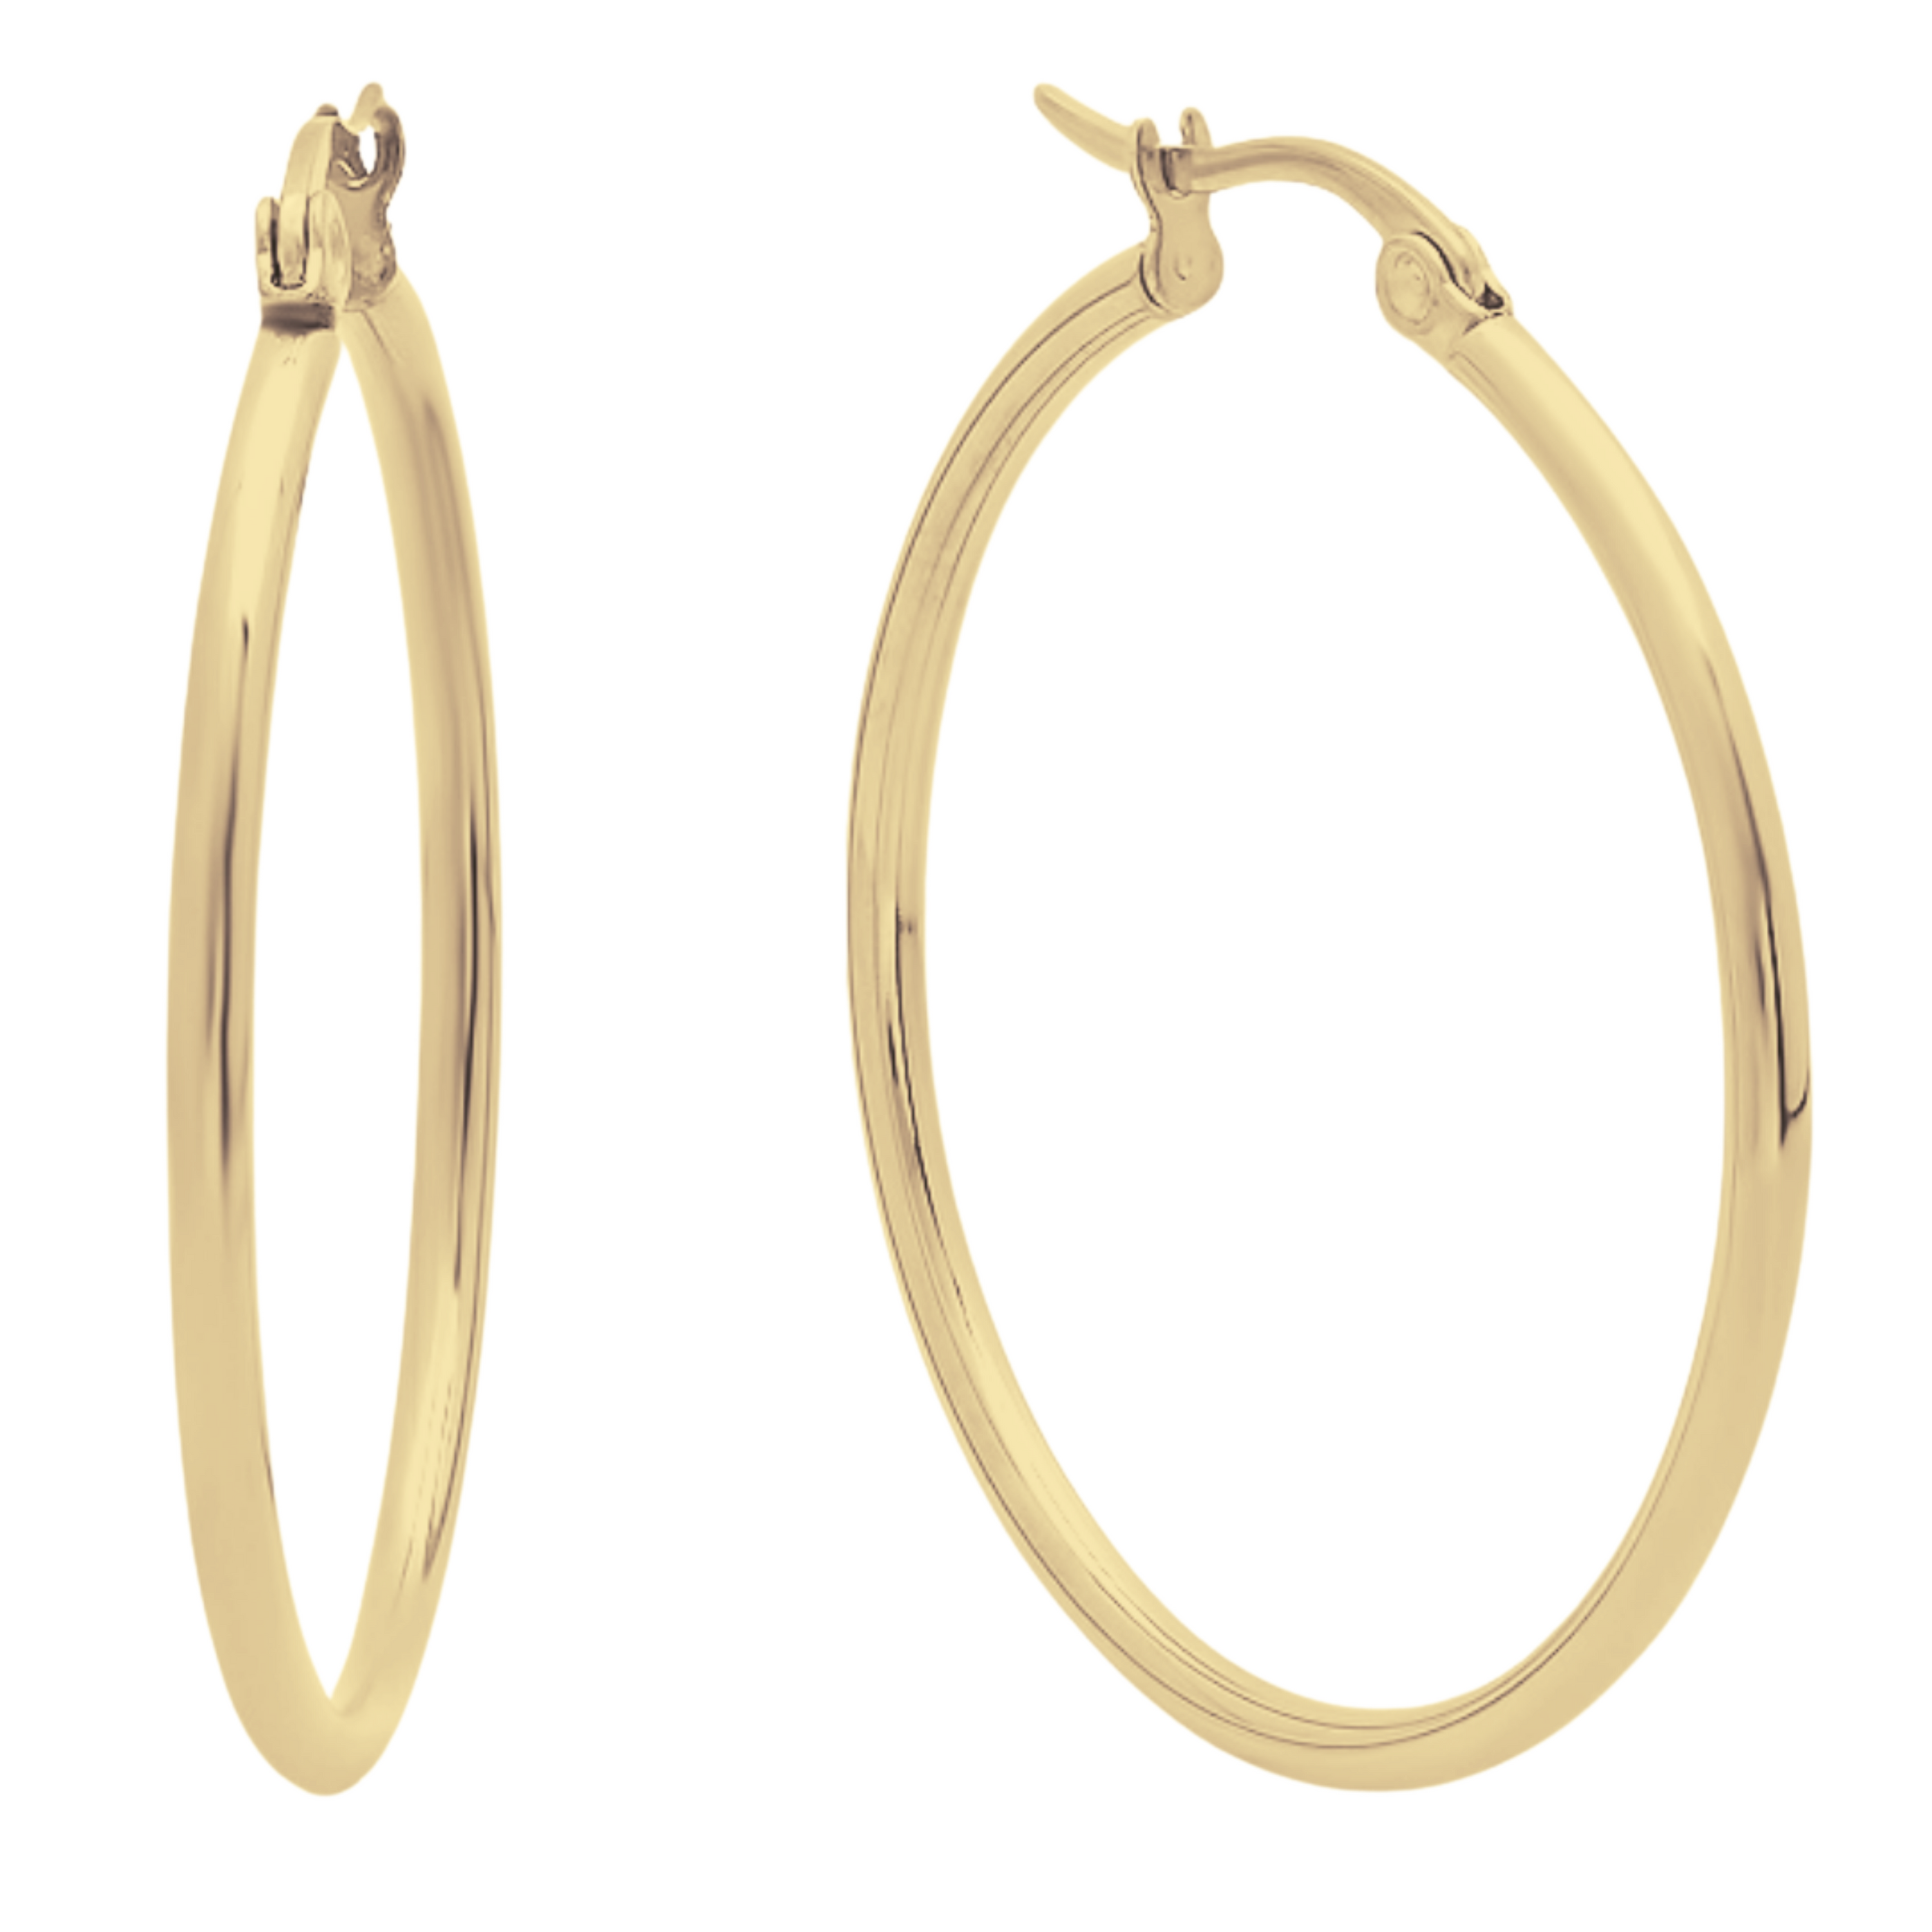 30mm Statement Hoops in GOLD